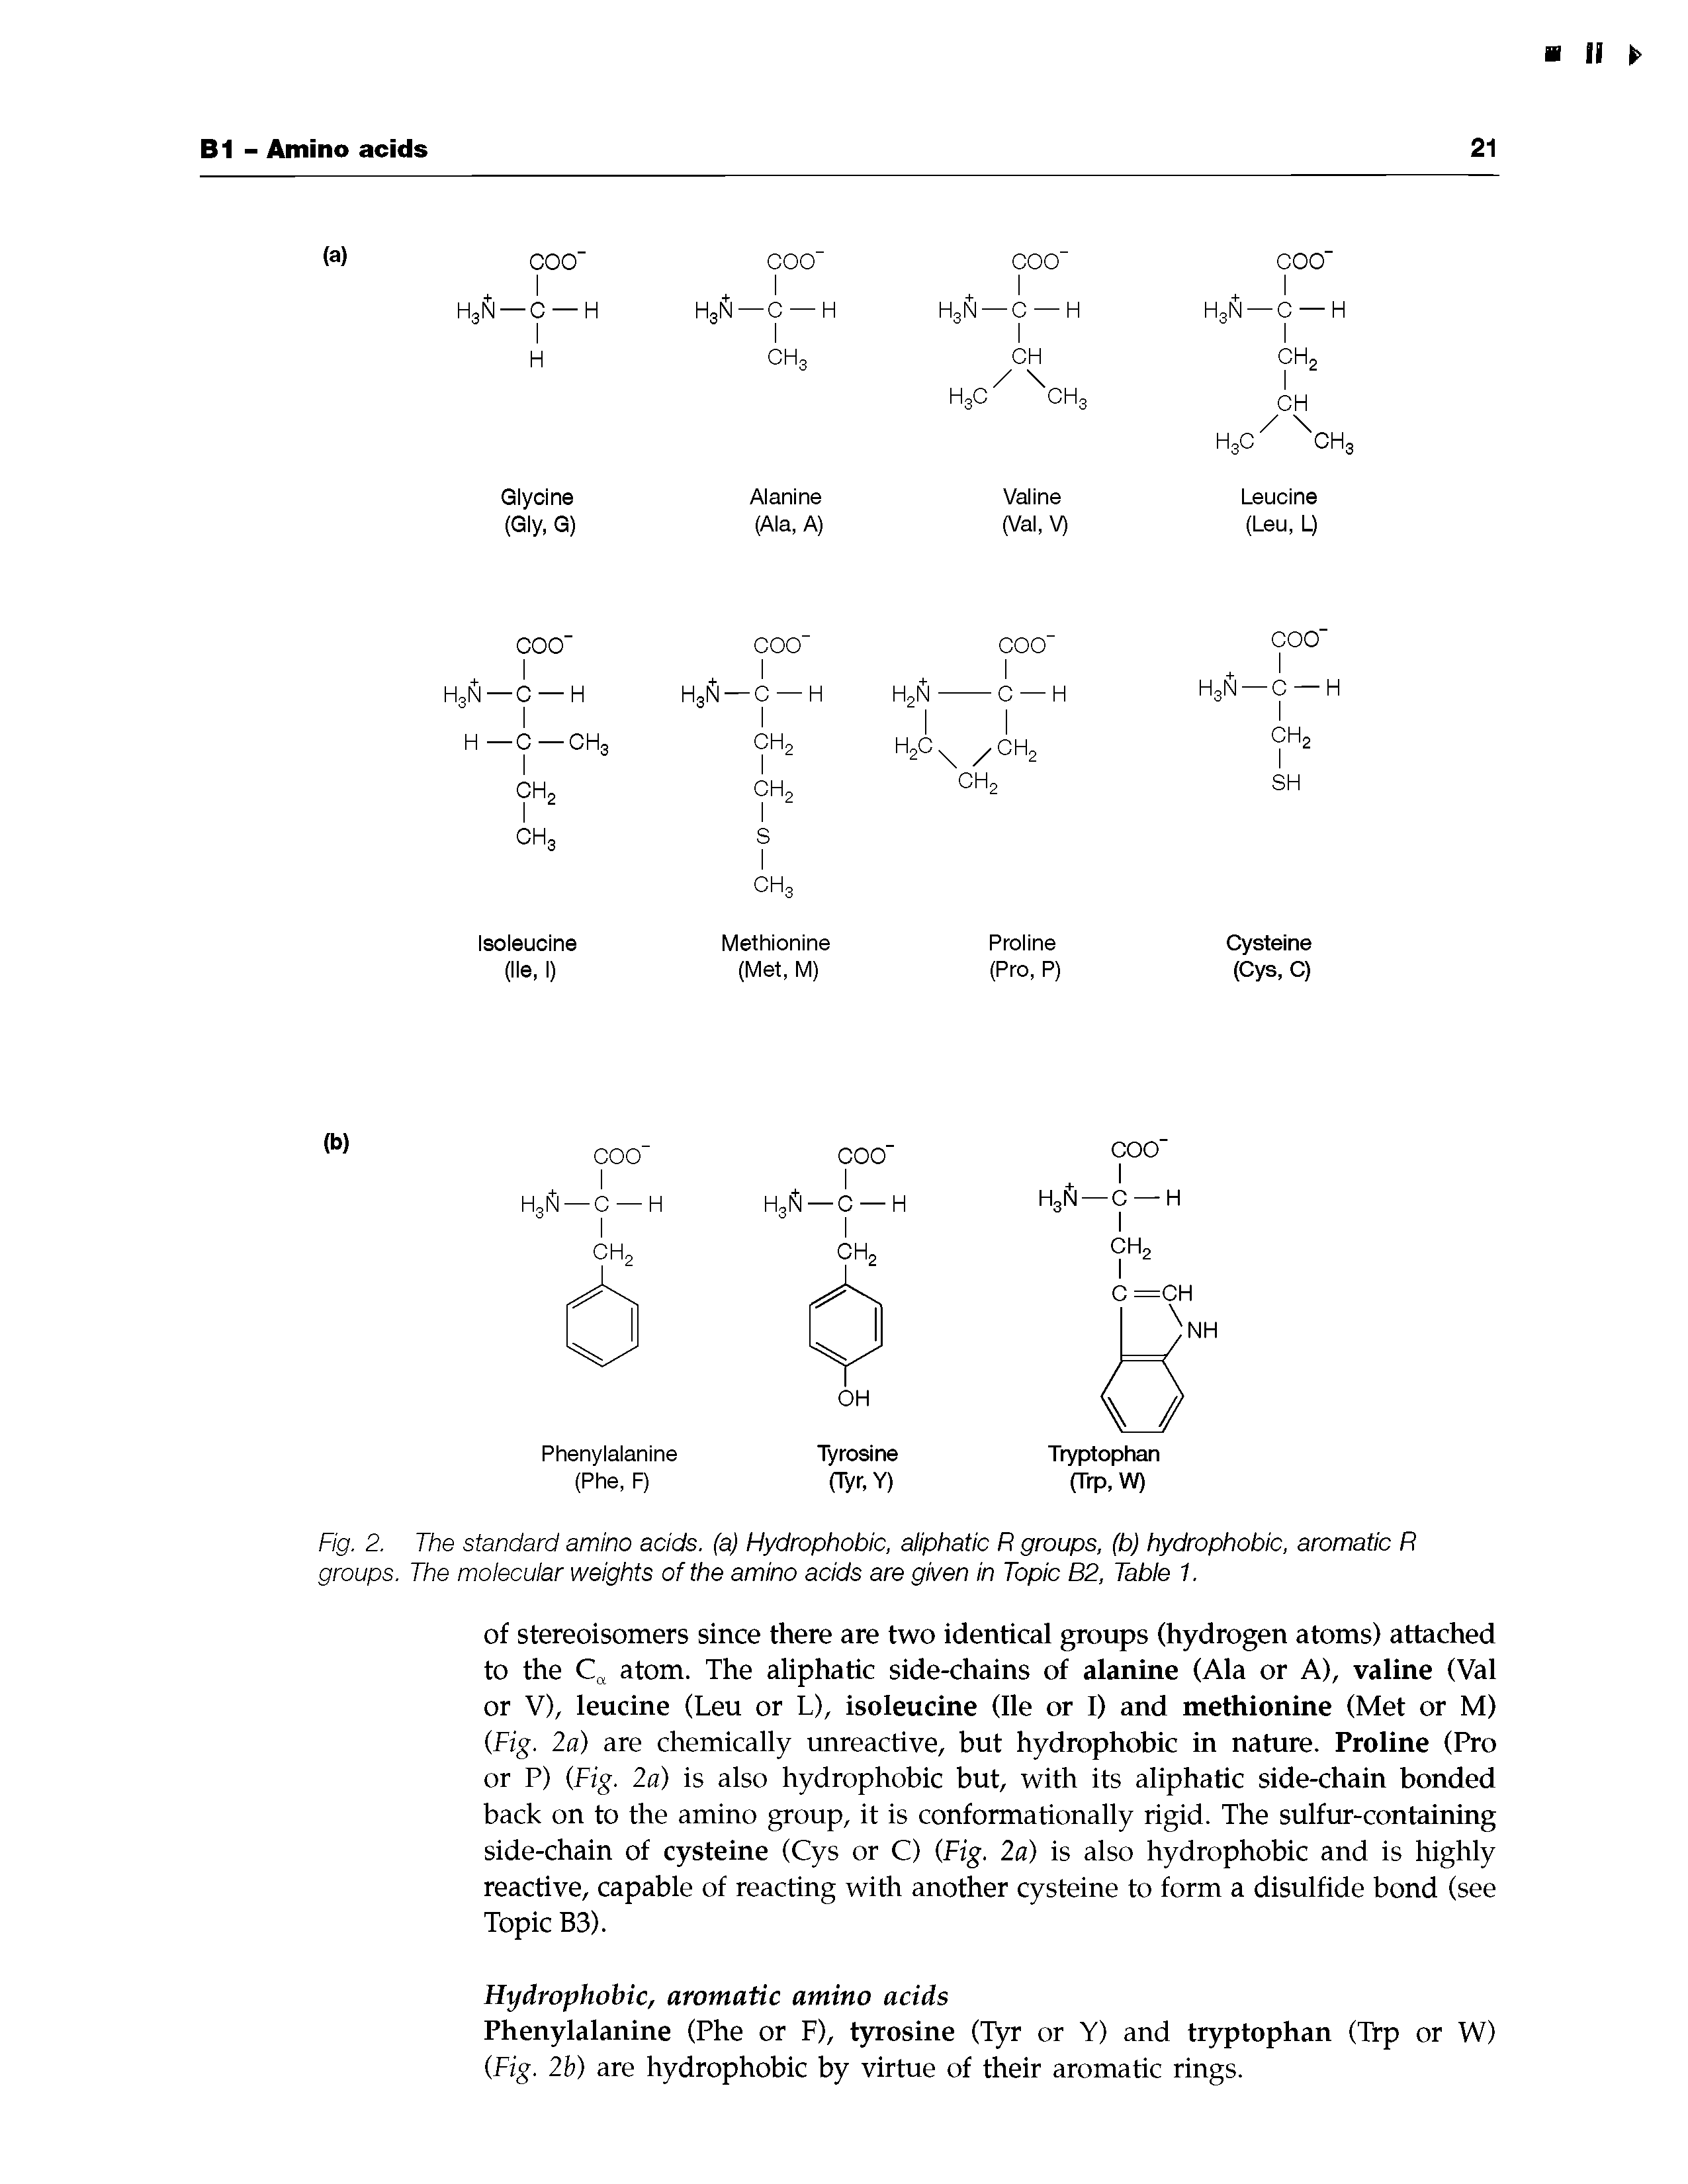 Fig. 2. The standard amino acids, (a) Hydrophobic, aliphatic R groups, (b) hydrophobic, aromatic R groups. The molecular weights of the amino acids are given in Topic B2, Table 1.